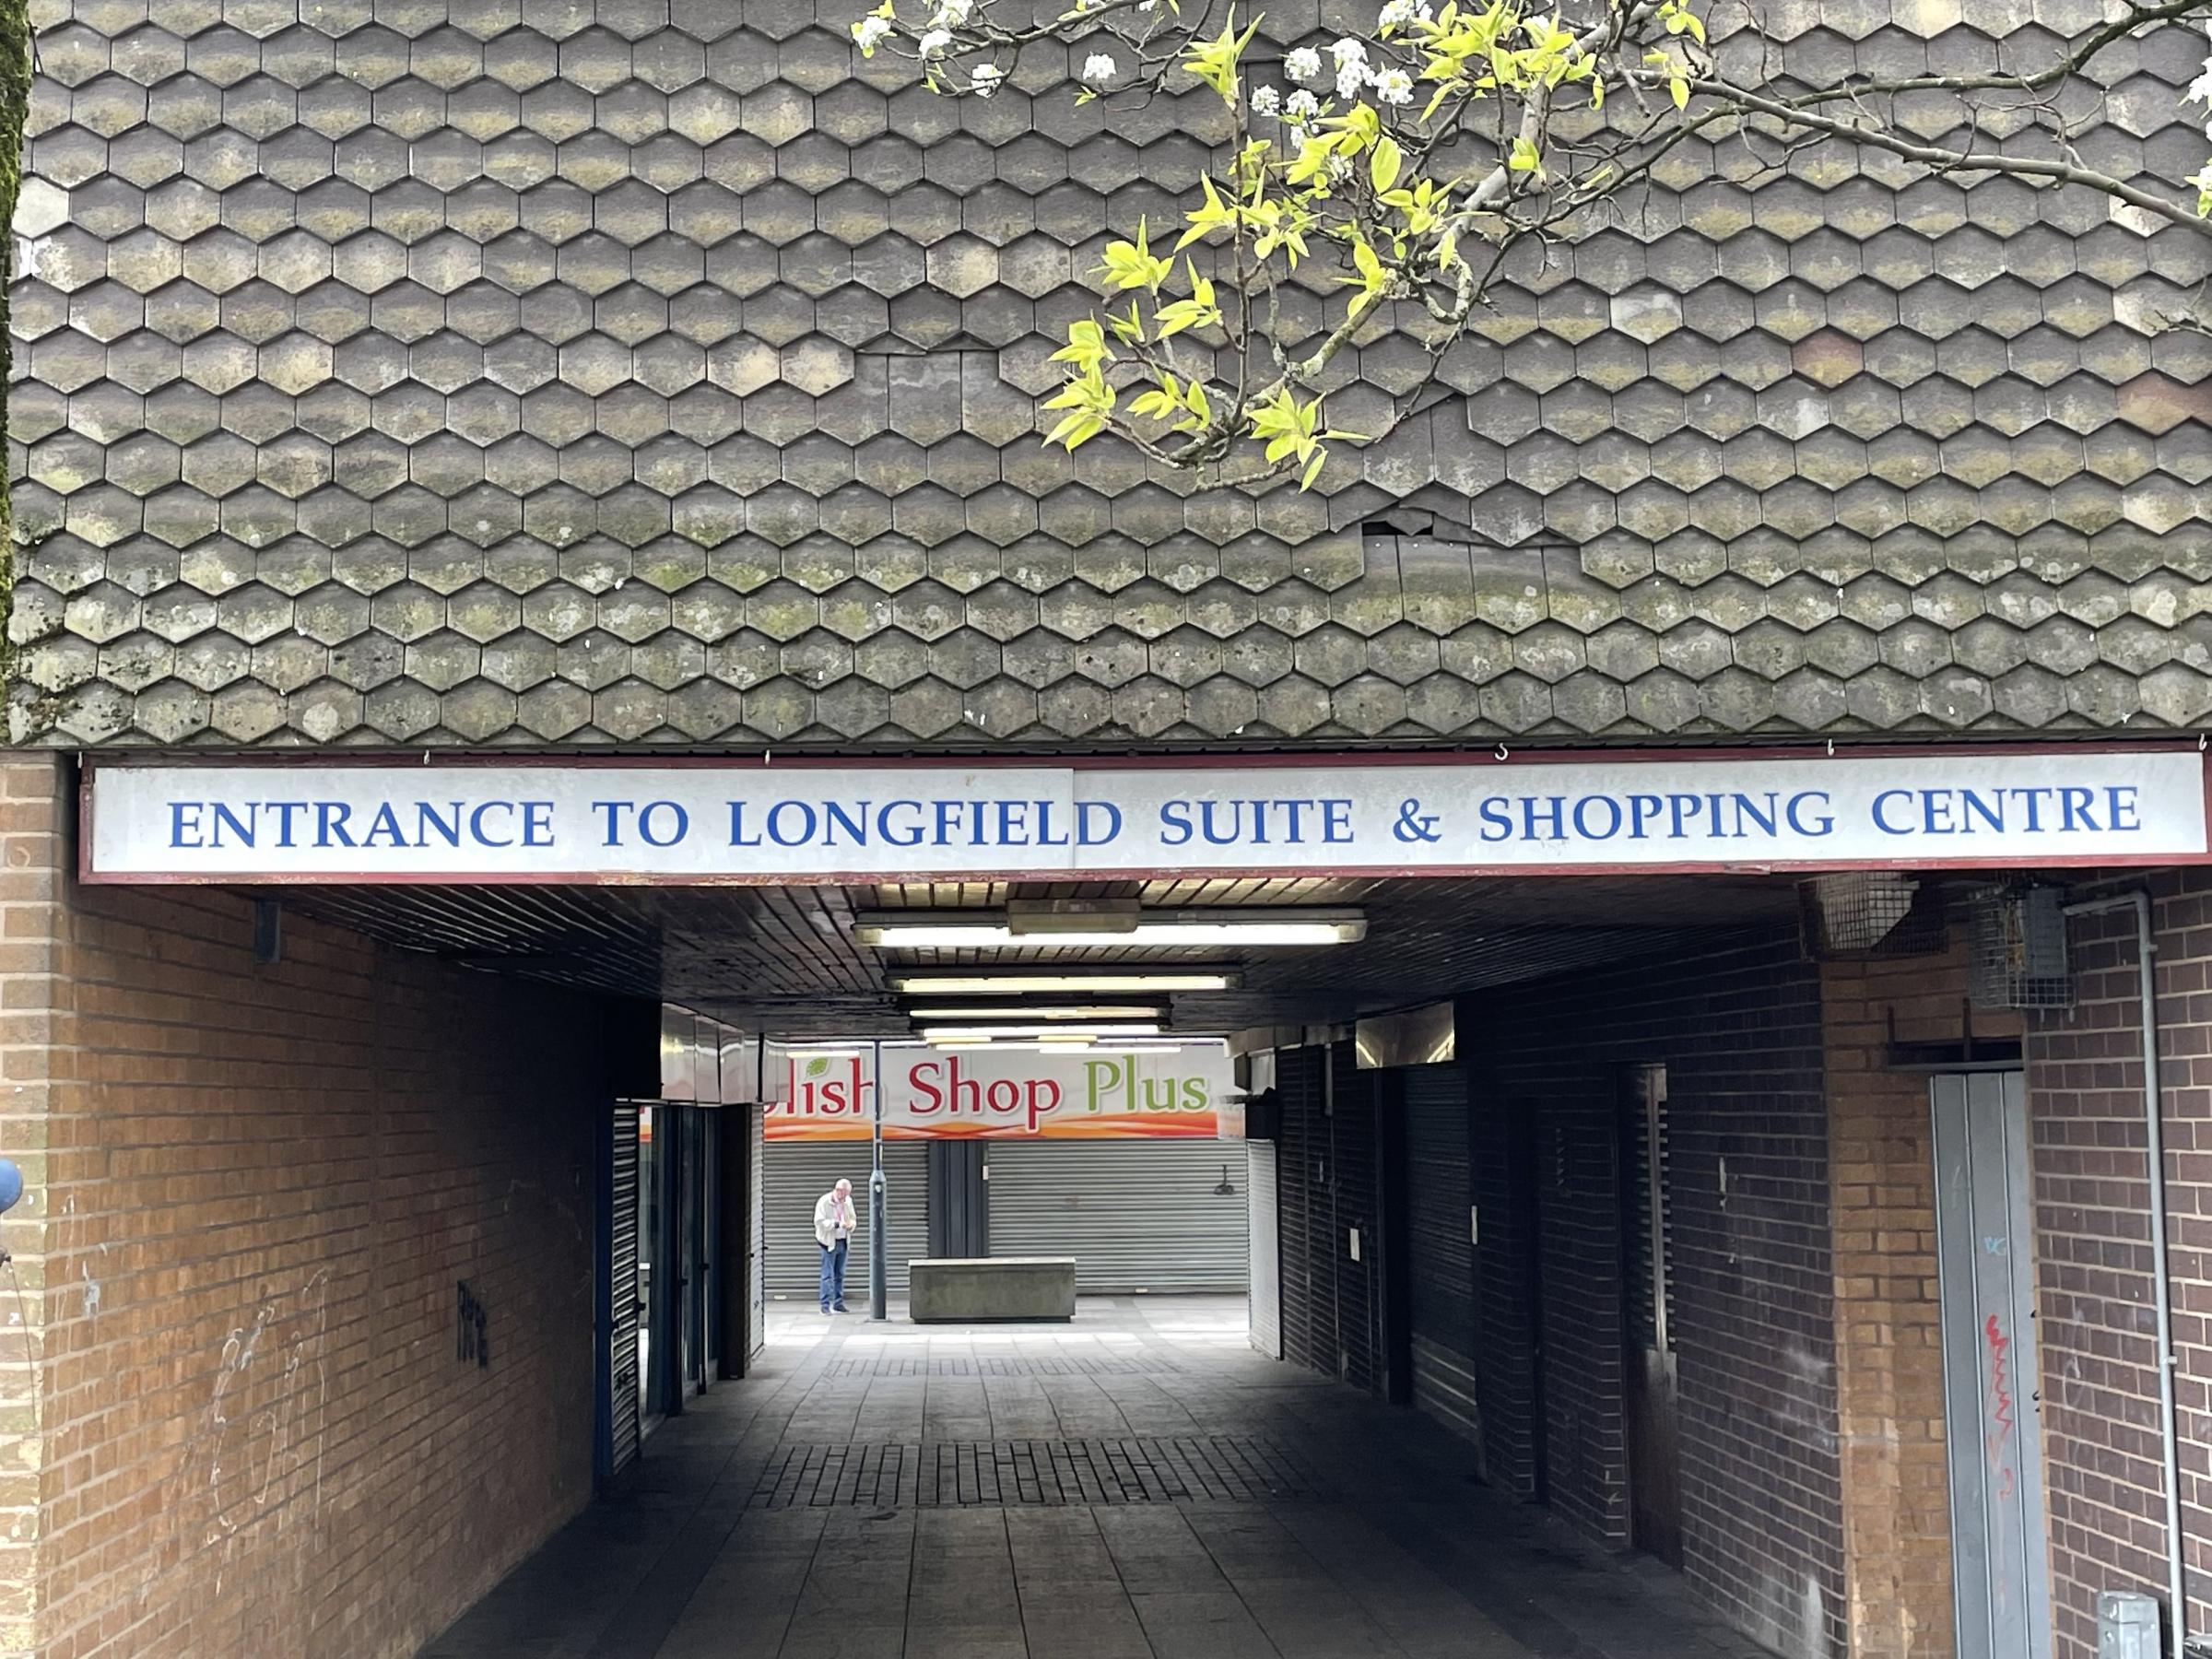 The Longfield Suite, beloved of many in the area with its sprung dancefloor, is currently closed.